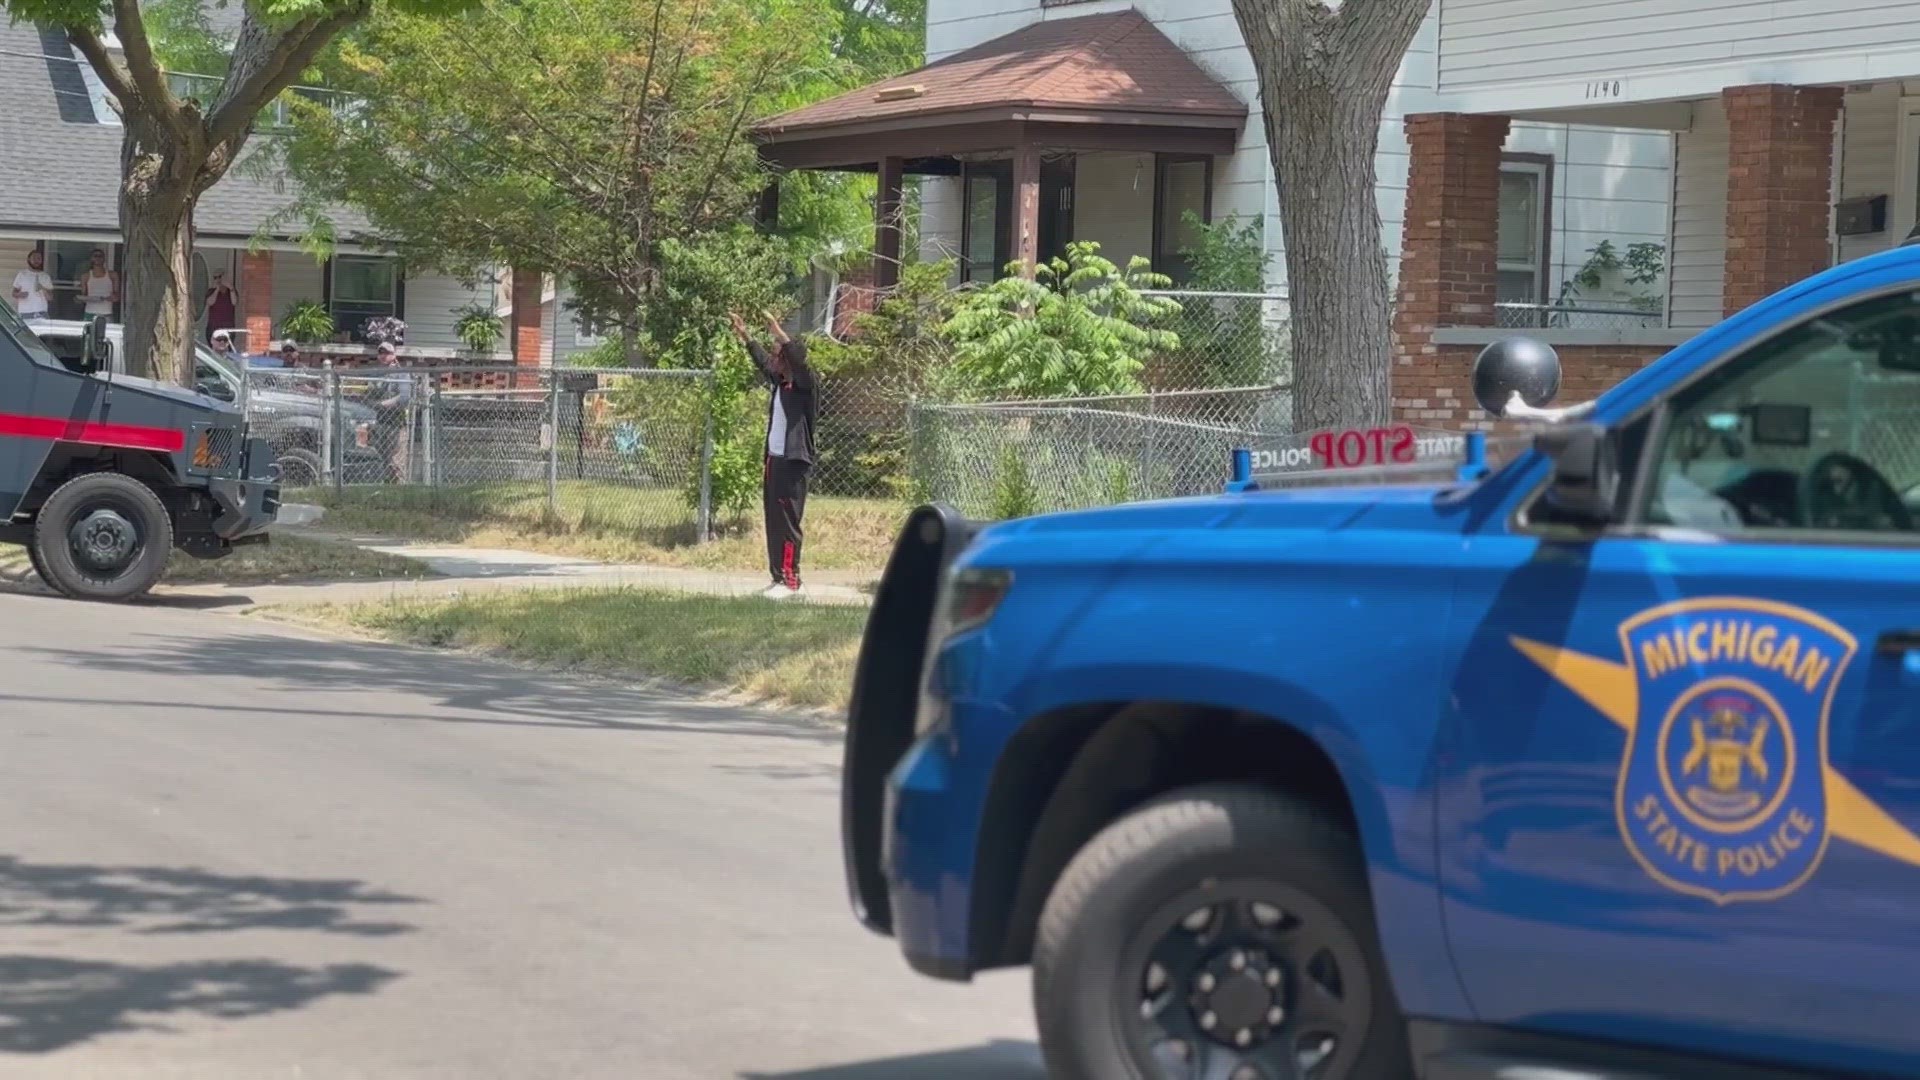 Grand Rapids Police arrested a man after a standoff Friday afternoon. The ordeal is linked to the 3rd grader who brought a loaded gun to Stocking Elementary School.